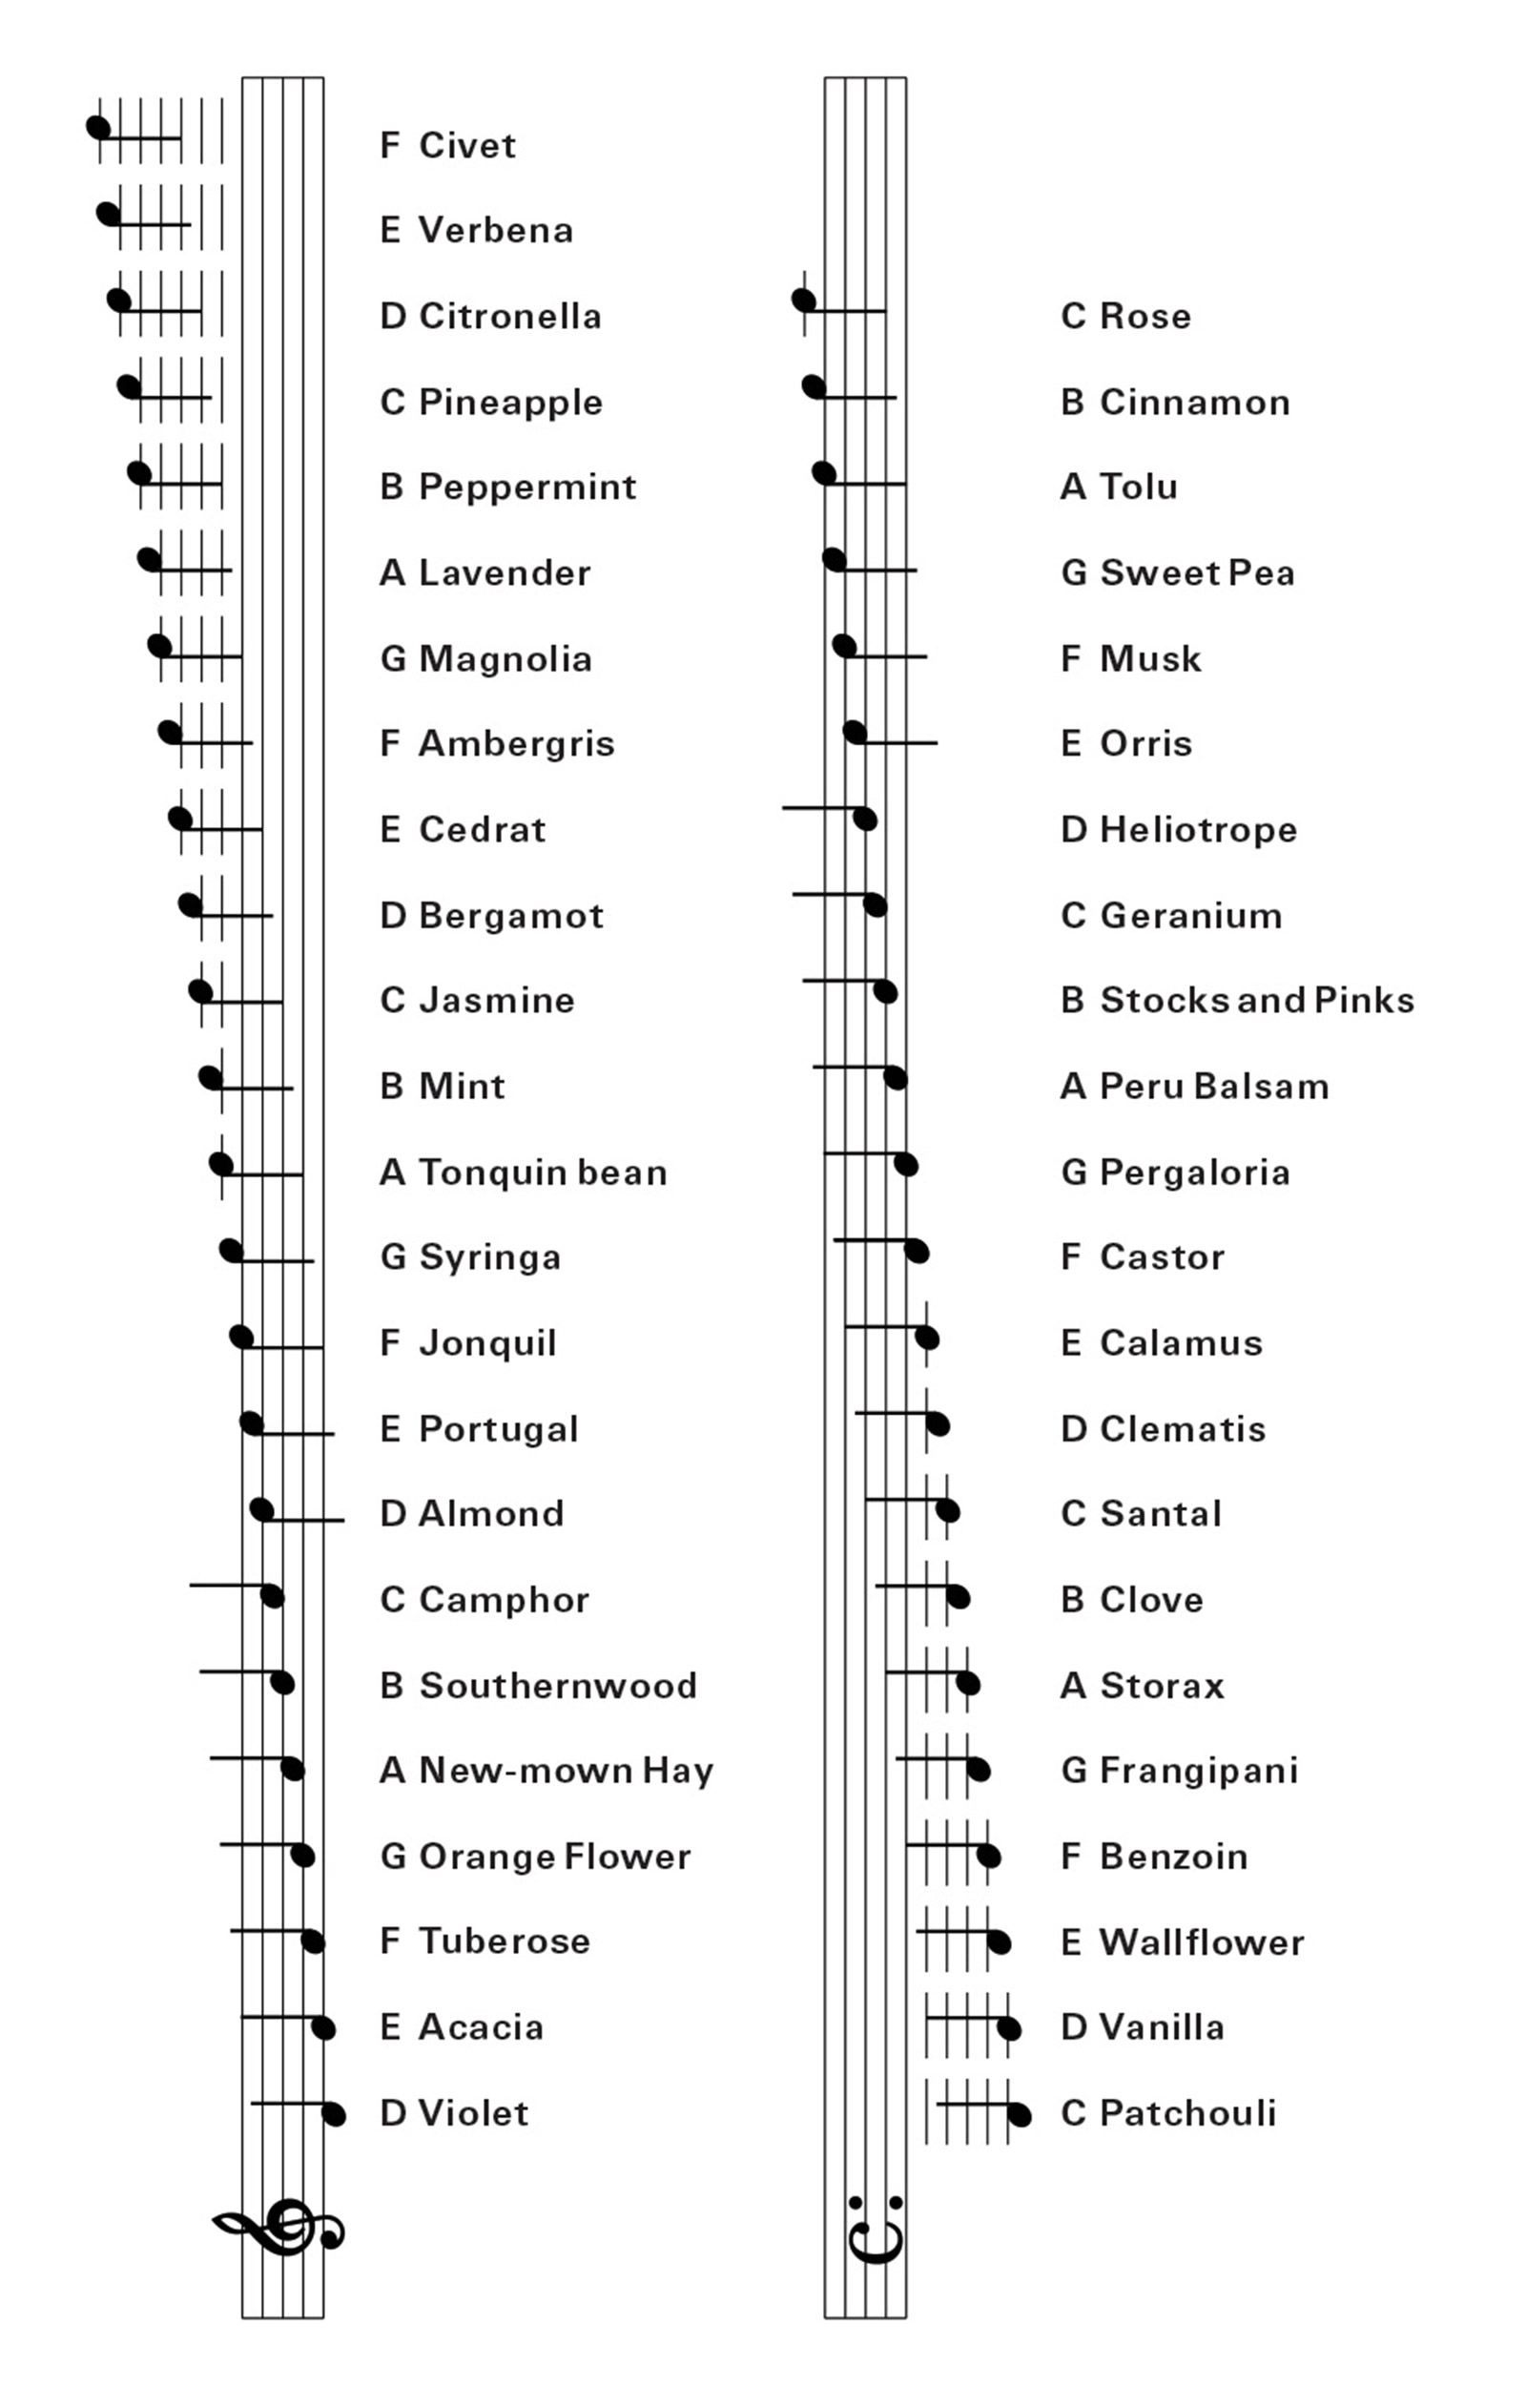 A music-inspired taxonomy of scent offered by English chemist and perfumer George William Septimus Piesse in his seminal book The Art of Perfumery (1857).